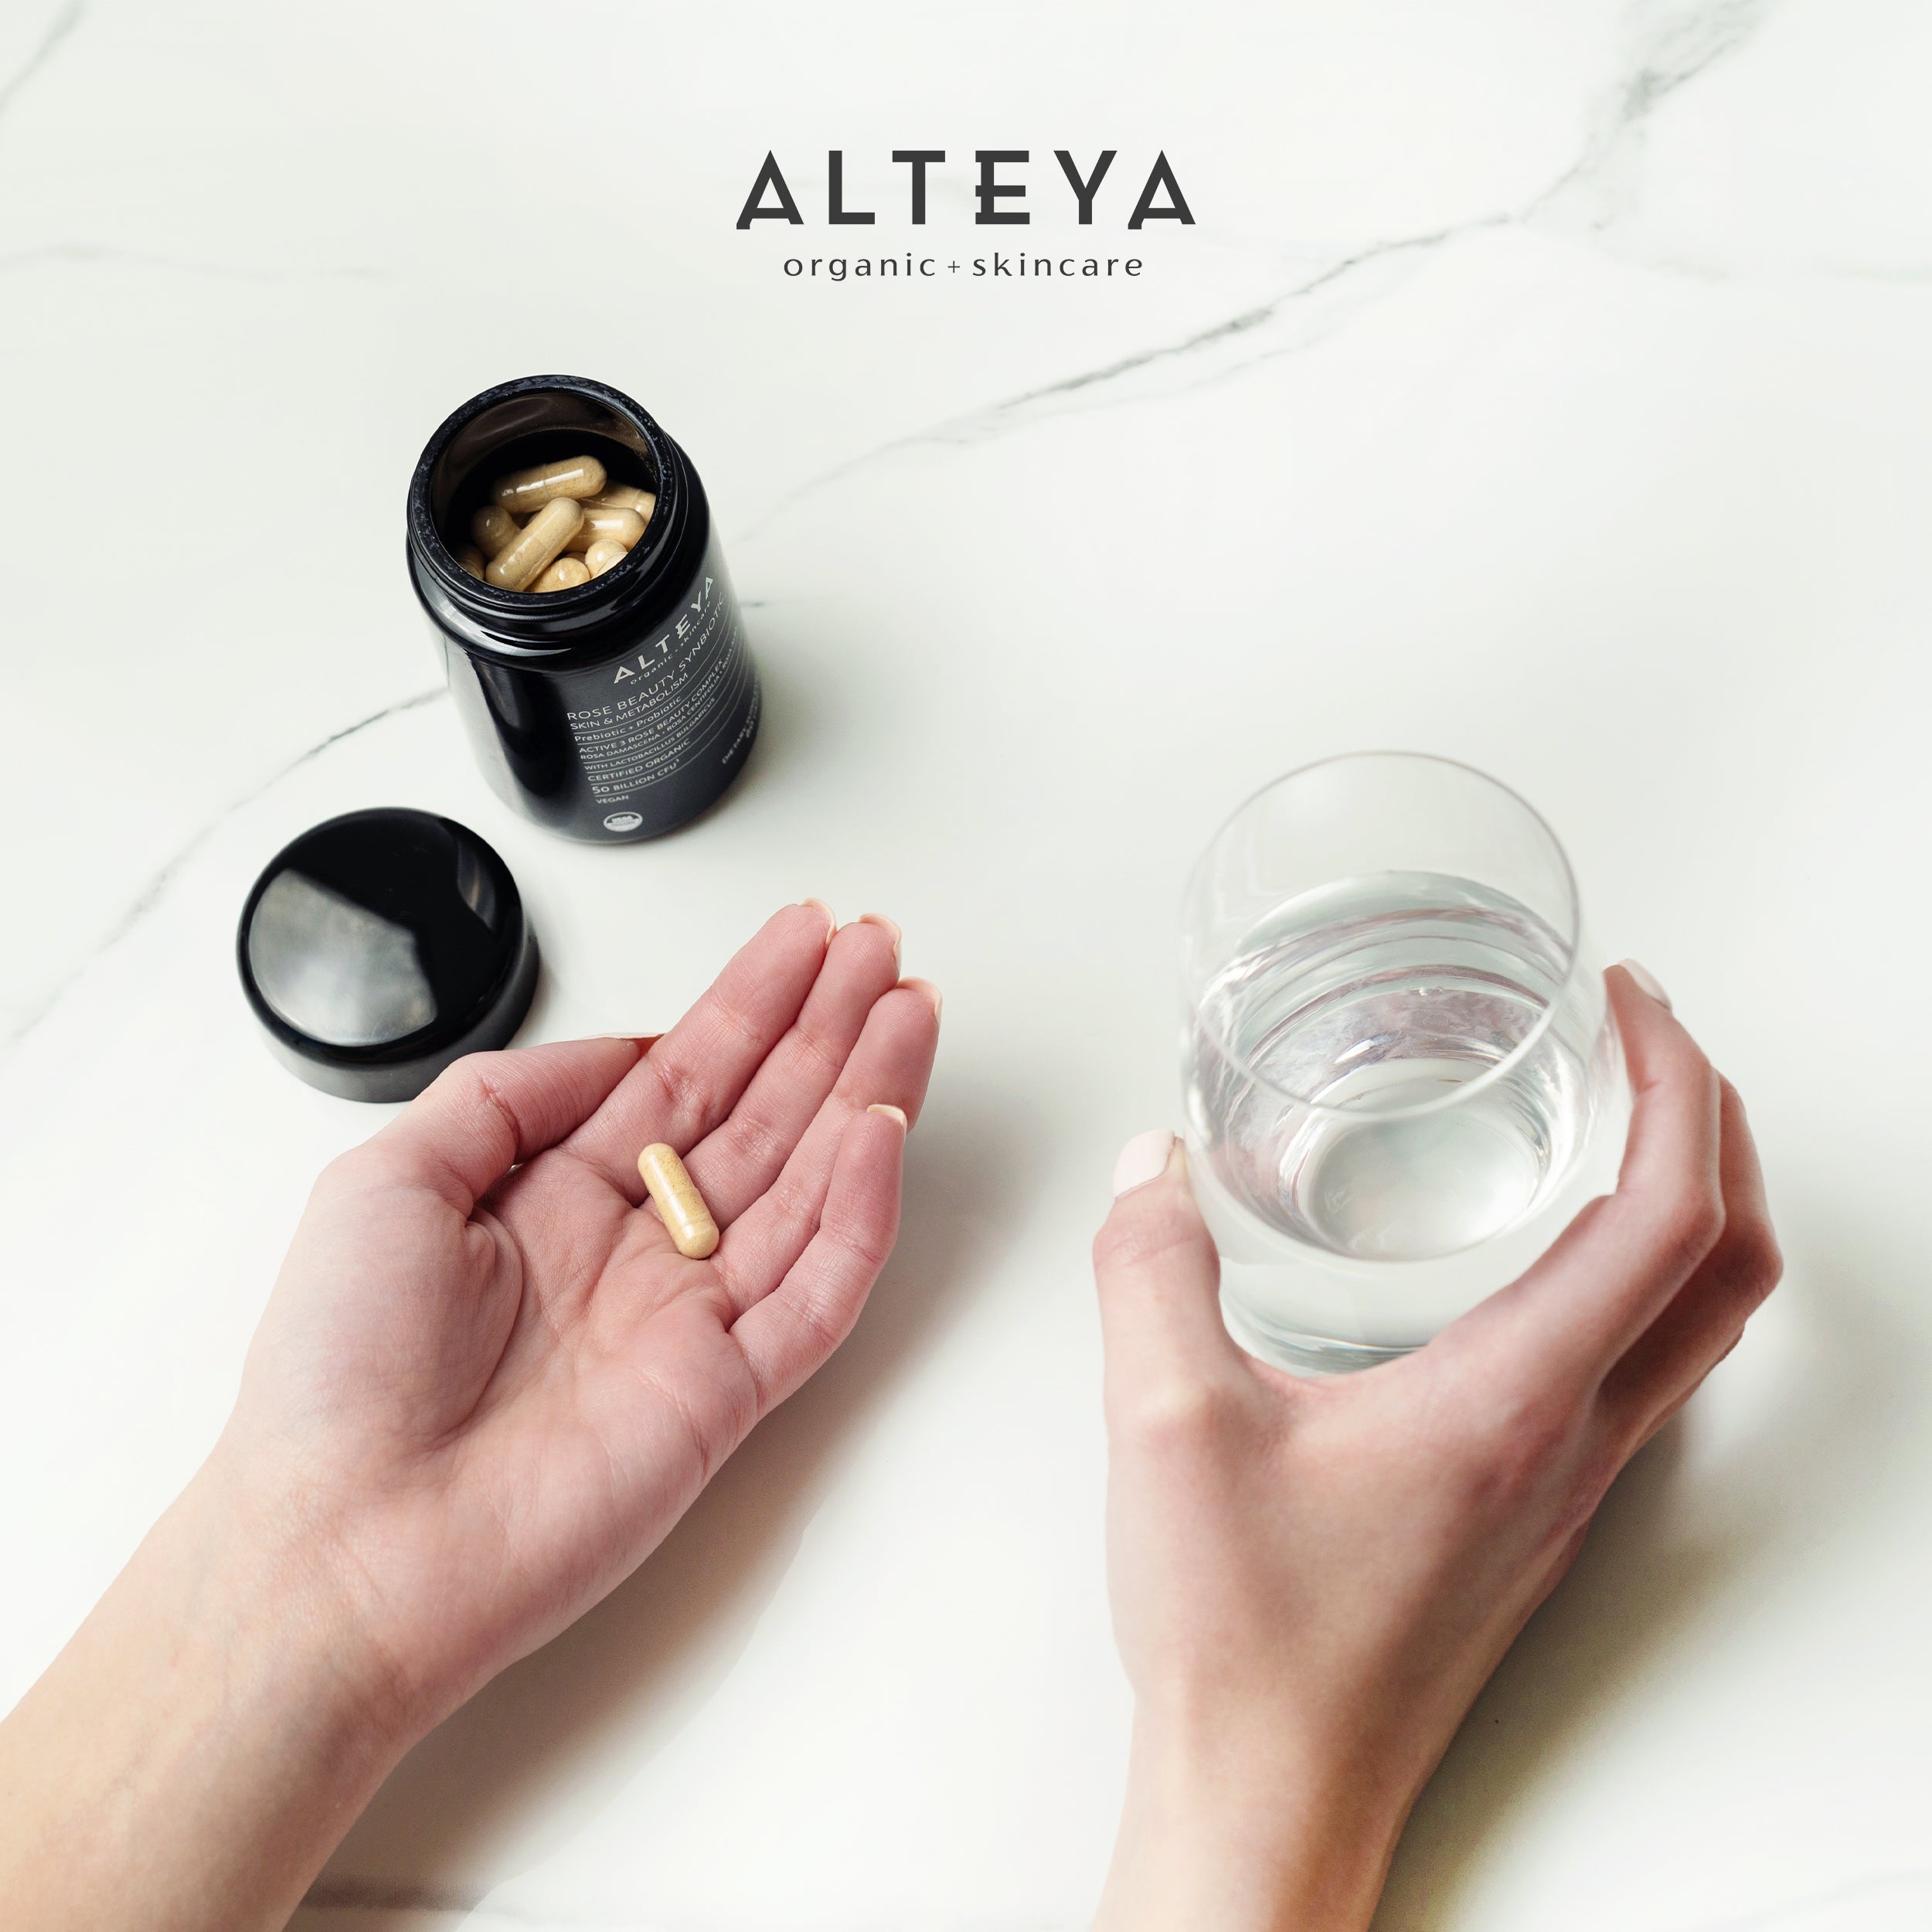 A woman's hand holding a glass of water and a bottle of Rose Beauty Prebiotic and Probiotic - Synbiotic Skin & Metabolism Vegan Organic Supplement by Alteya Organics for gut health.